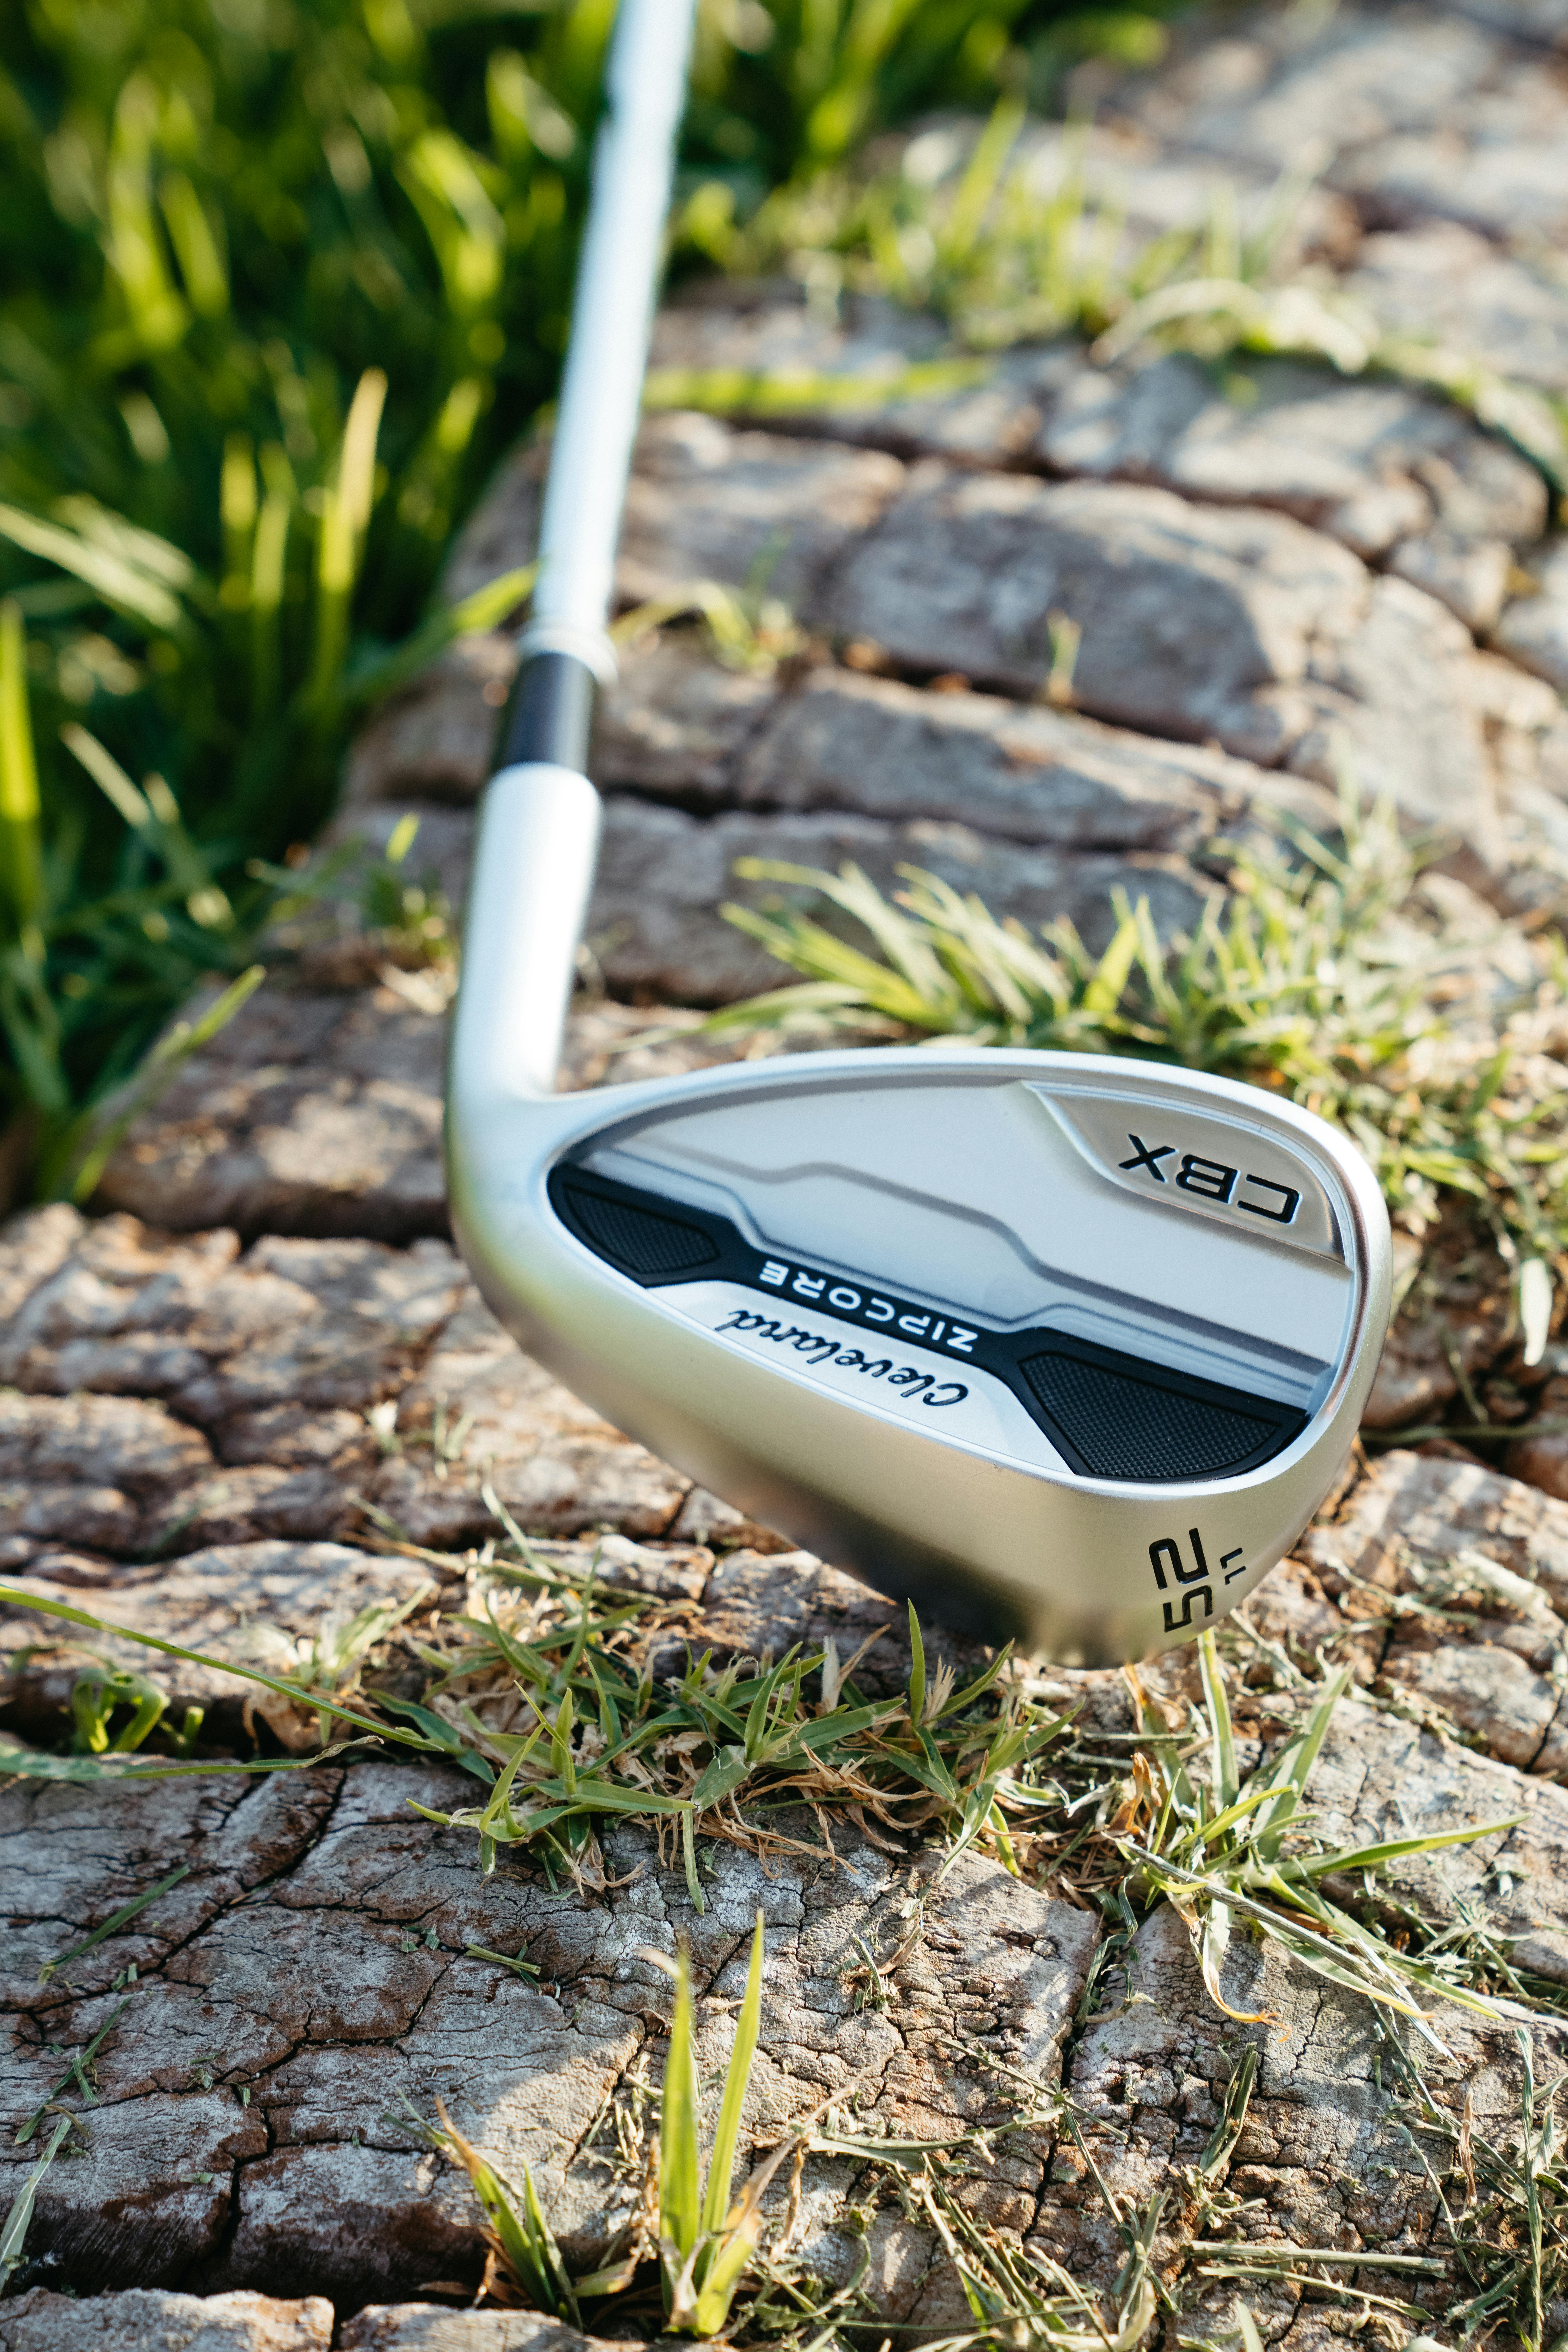 Cleveland CBX Zipcore Wedge · Left handed · Steel · 50° · 11° · Chrome